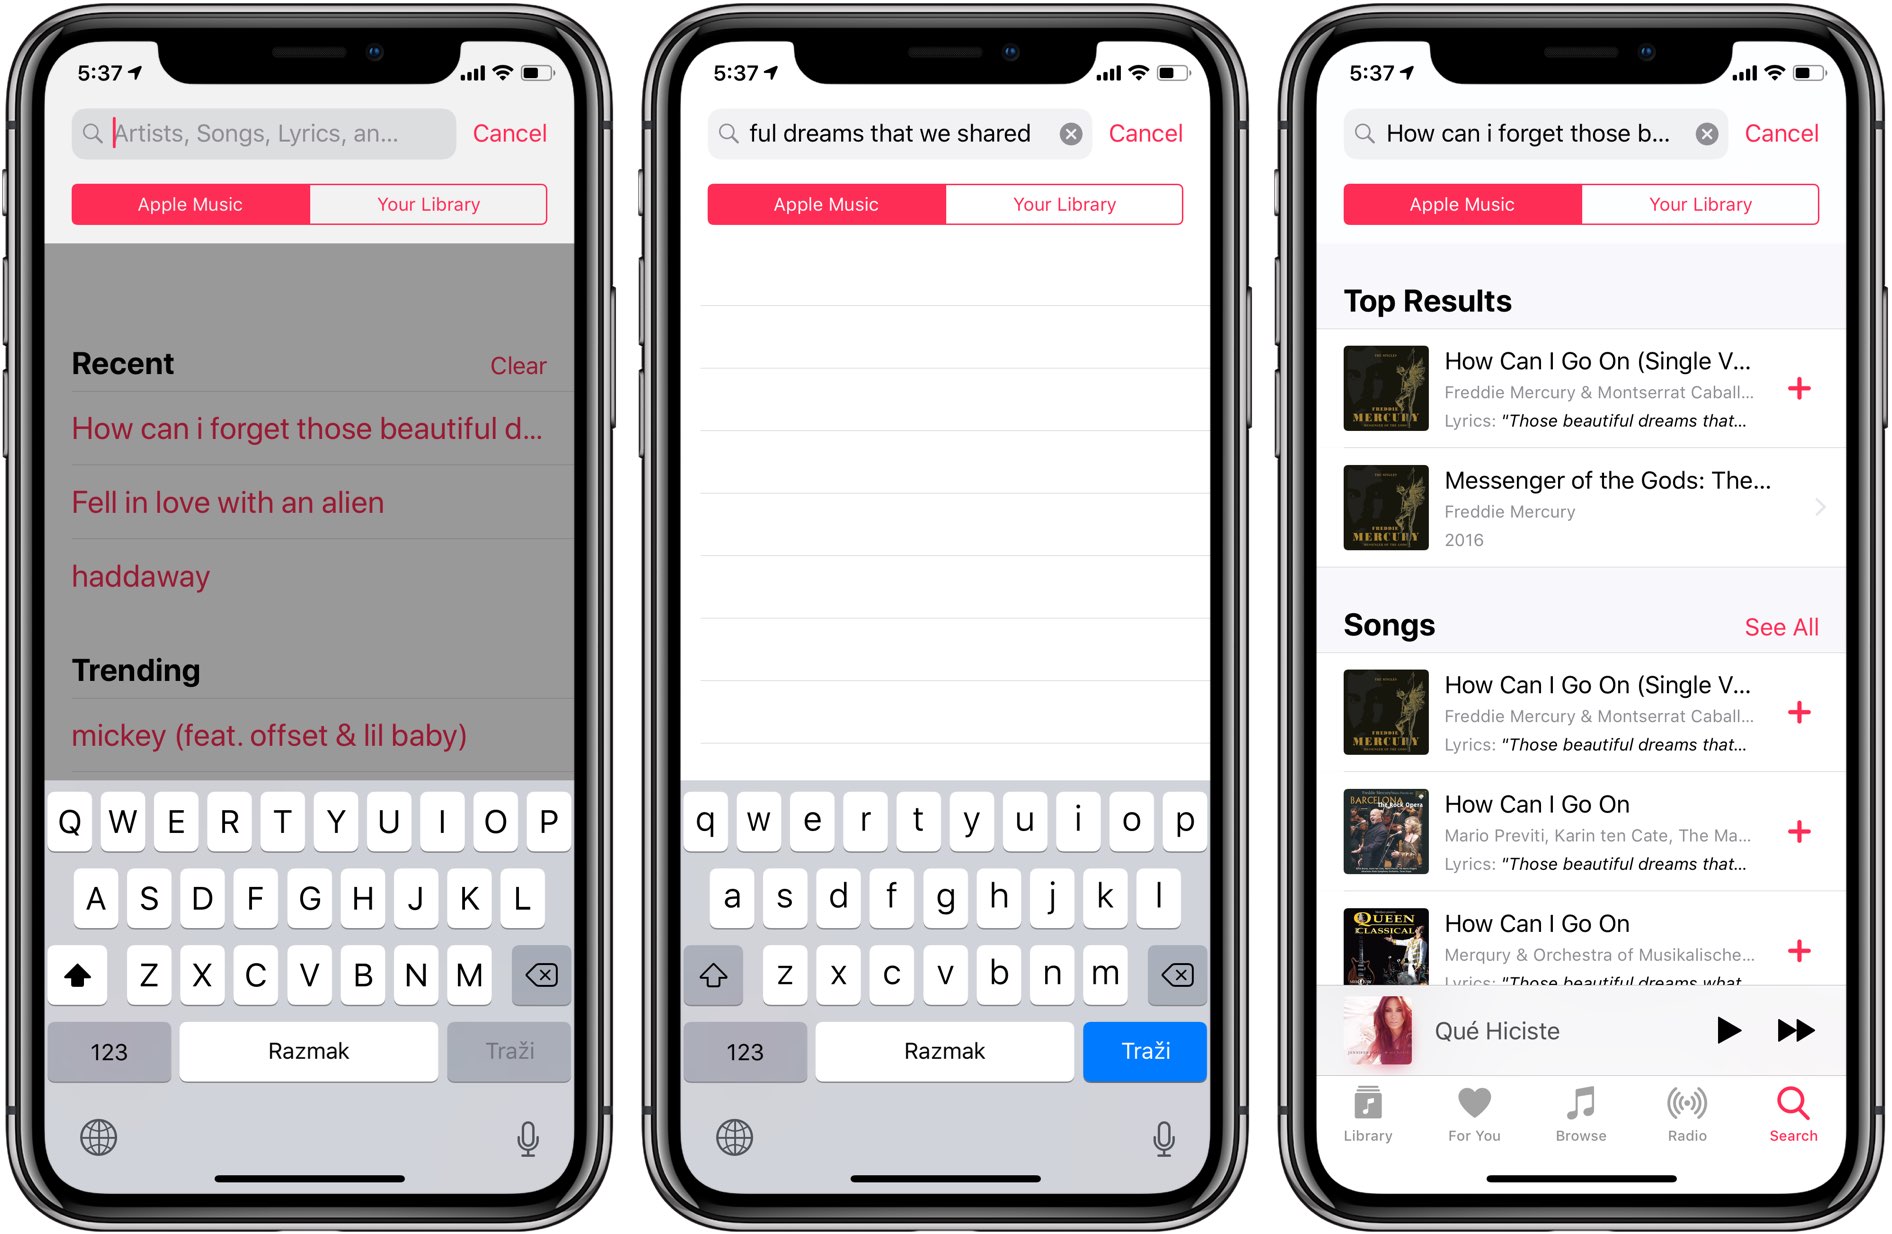 Use the Search feature in iOS 12's Music app to find songs by their lyrics